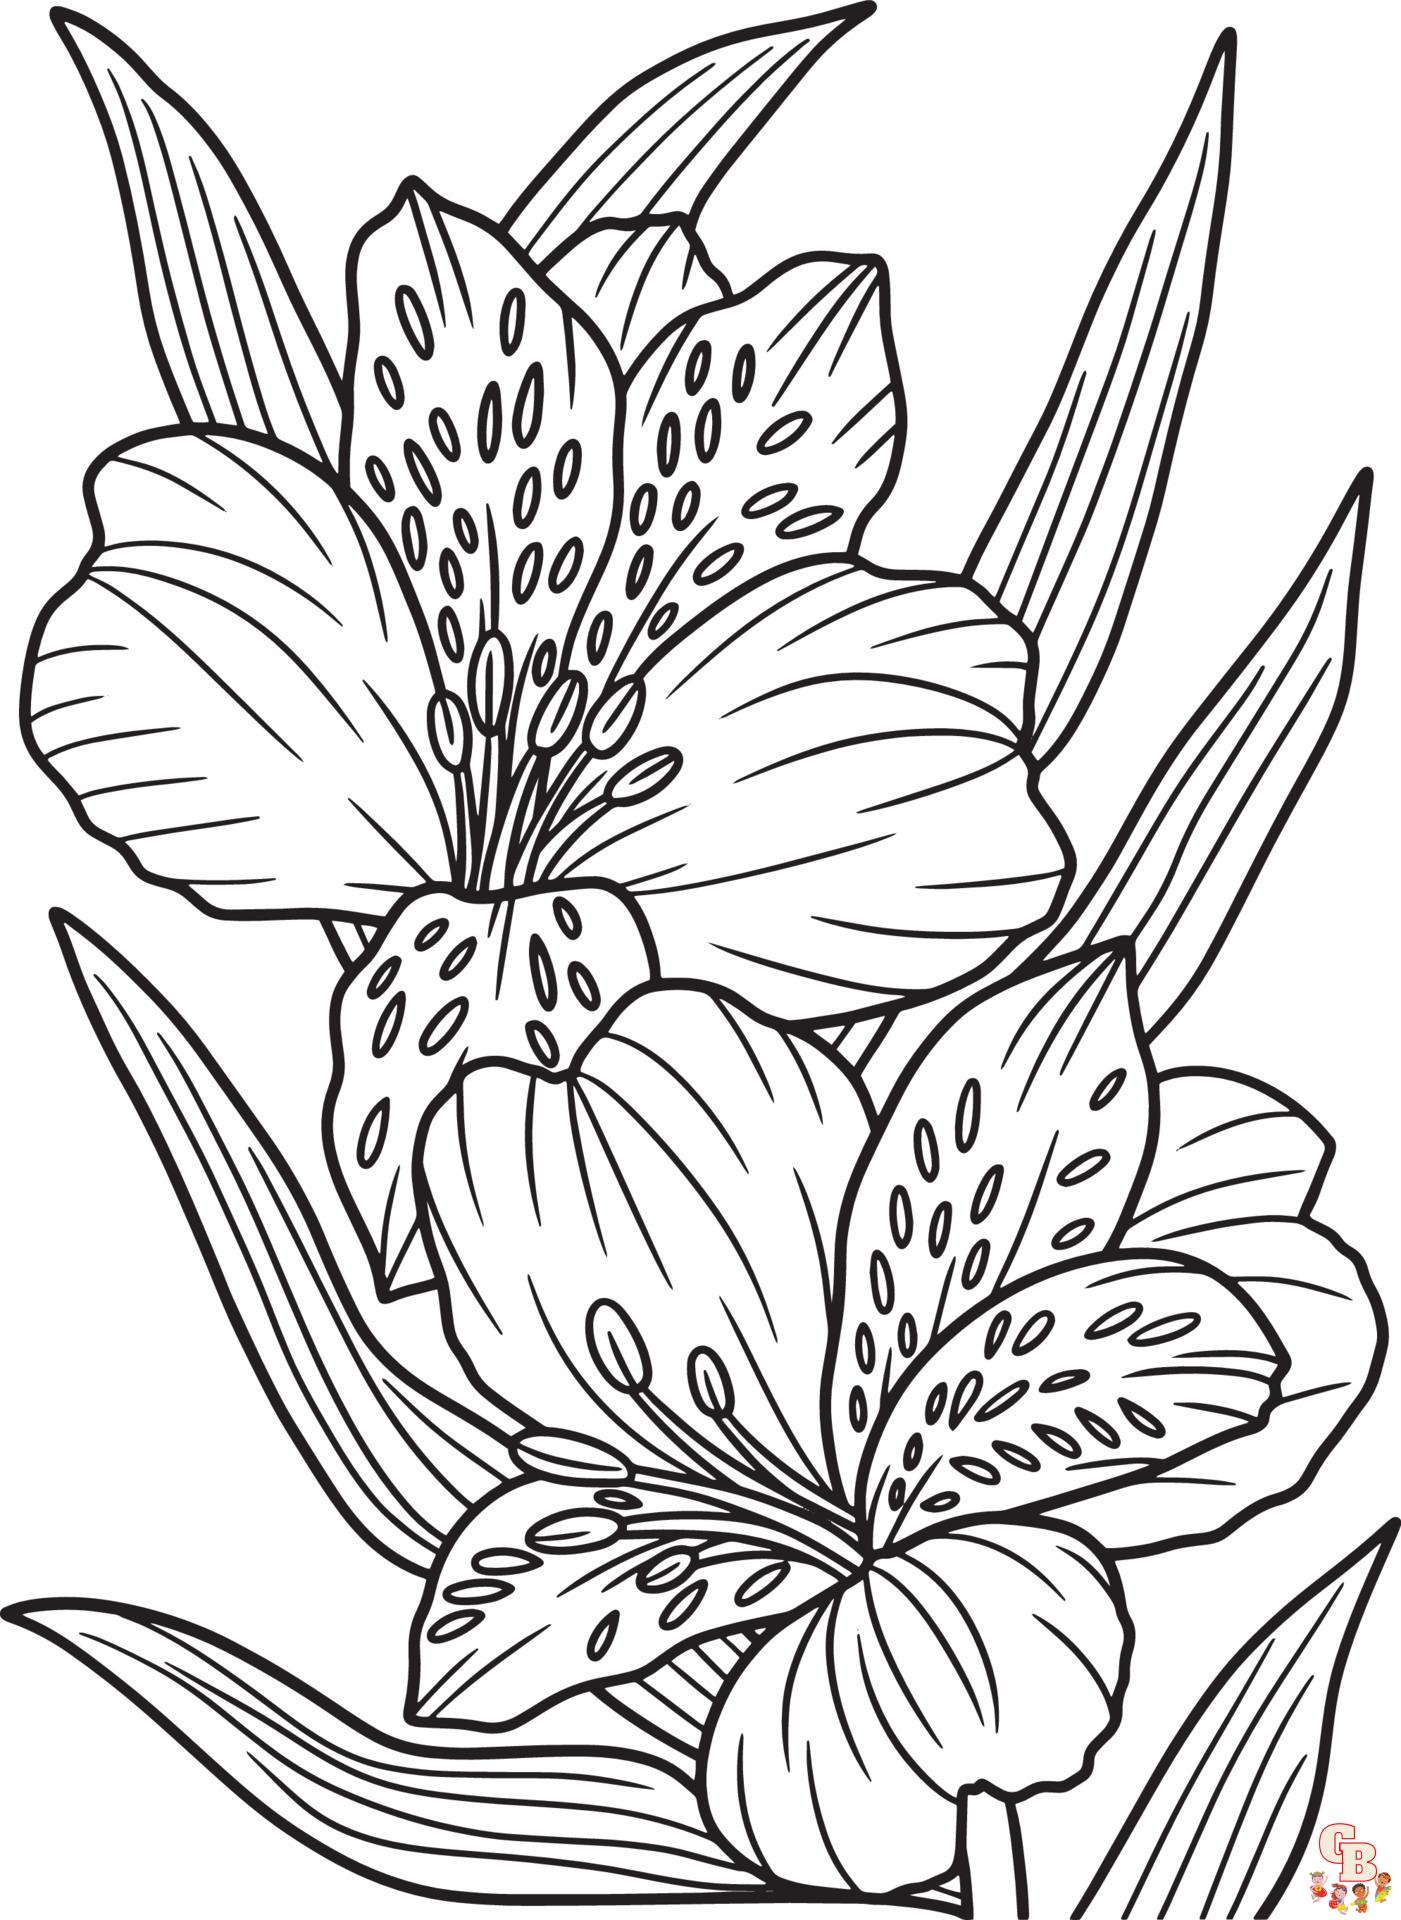 Alstroemeria Coloring Pages 1